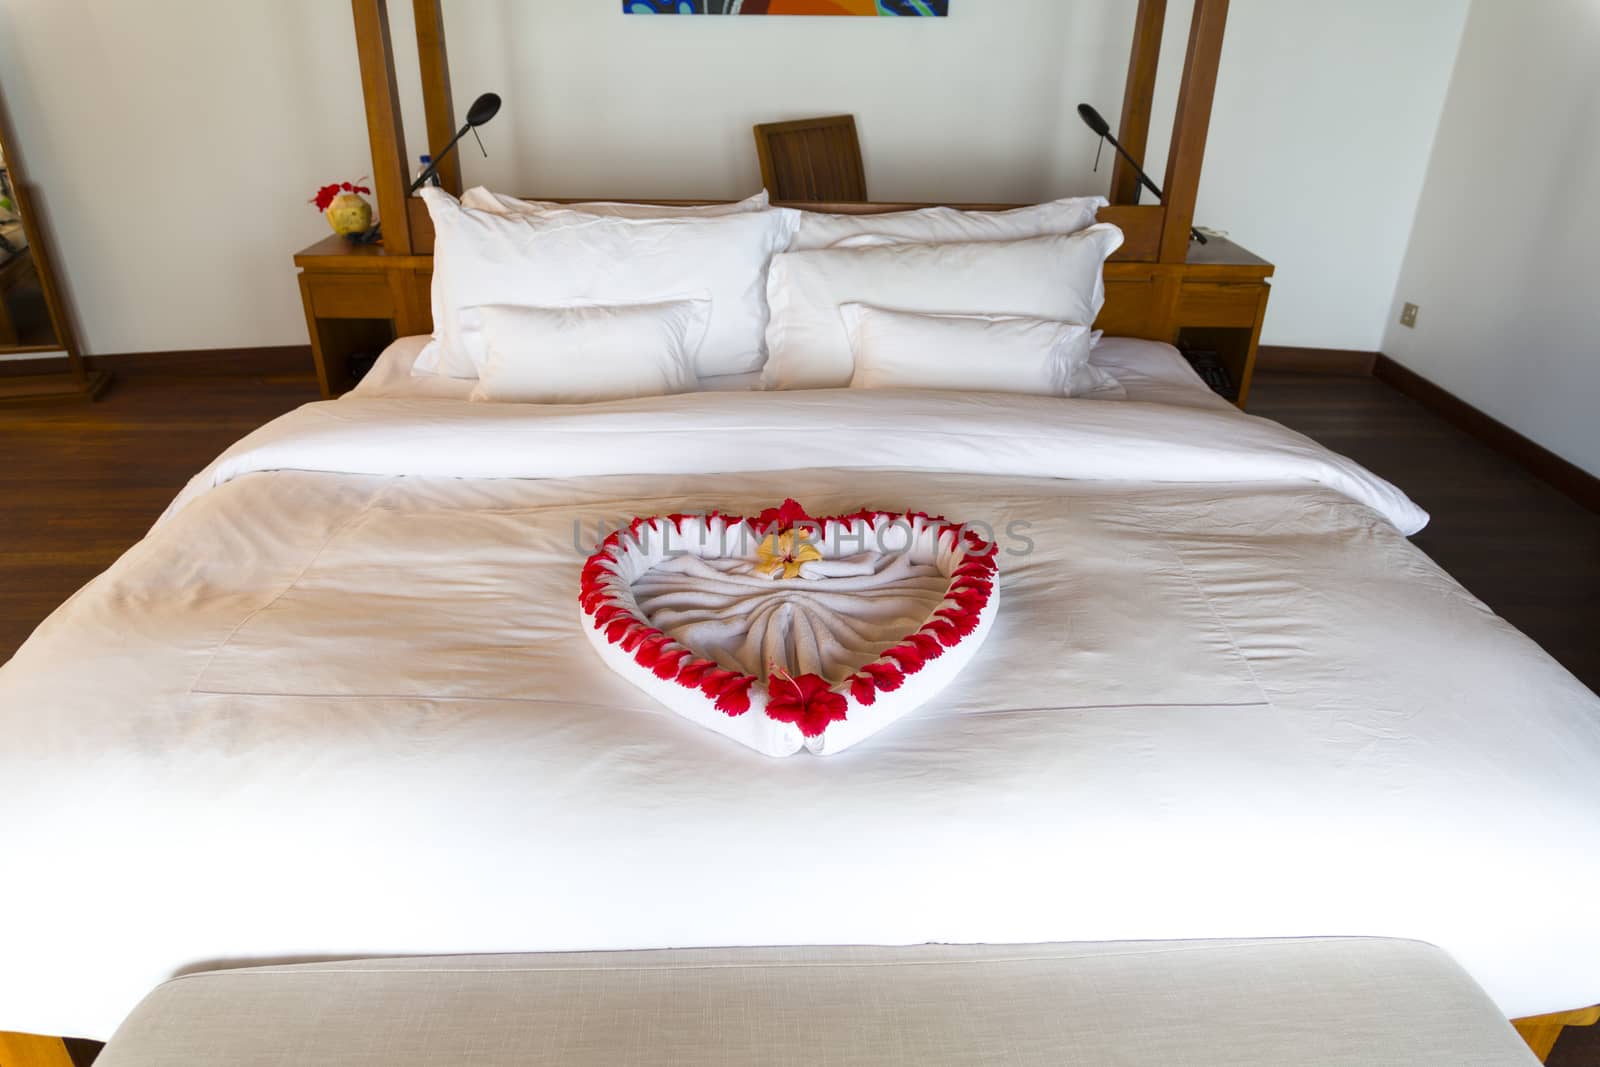 Towel forms a beautiful heart decorated with red flowers in a Luxury Resort room in Maldives. The heart is in the middle of the bed, the floor is wooden made.